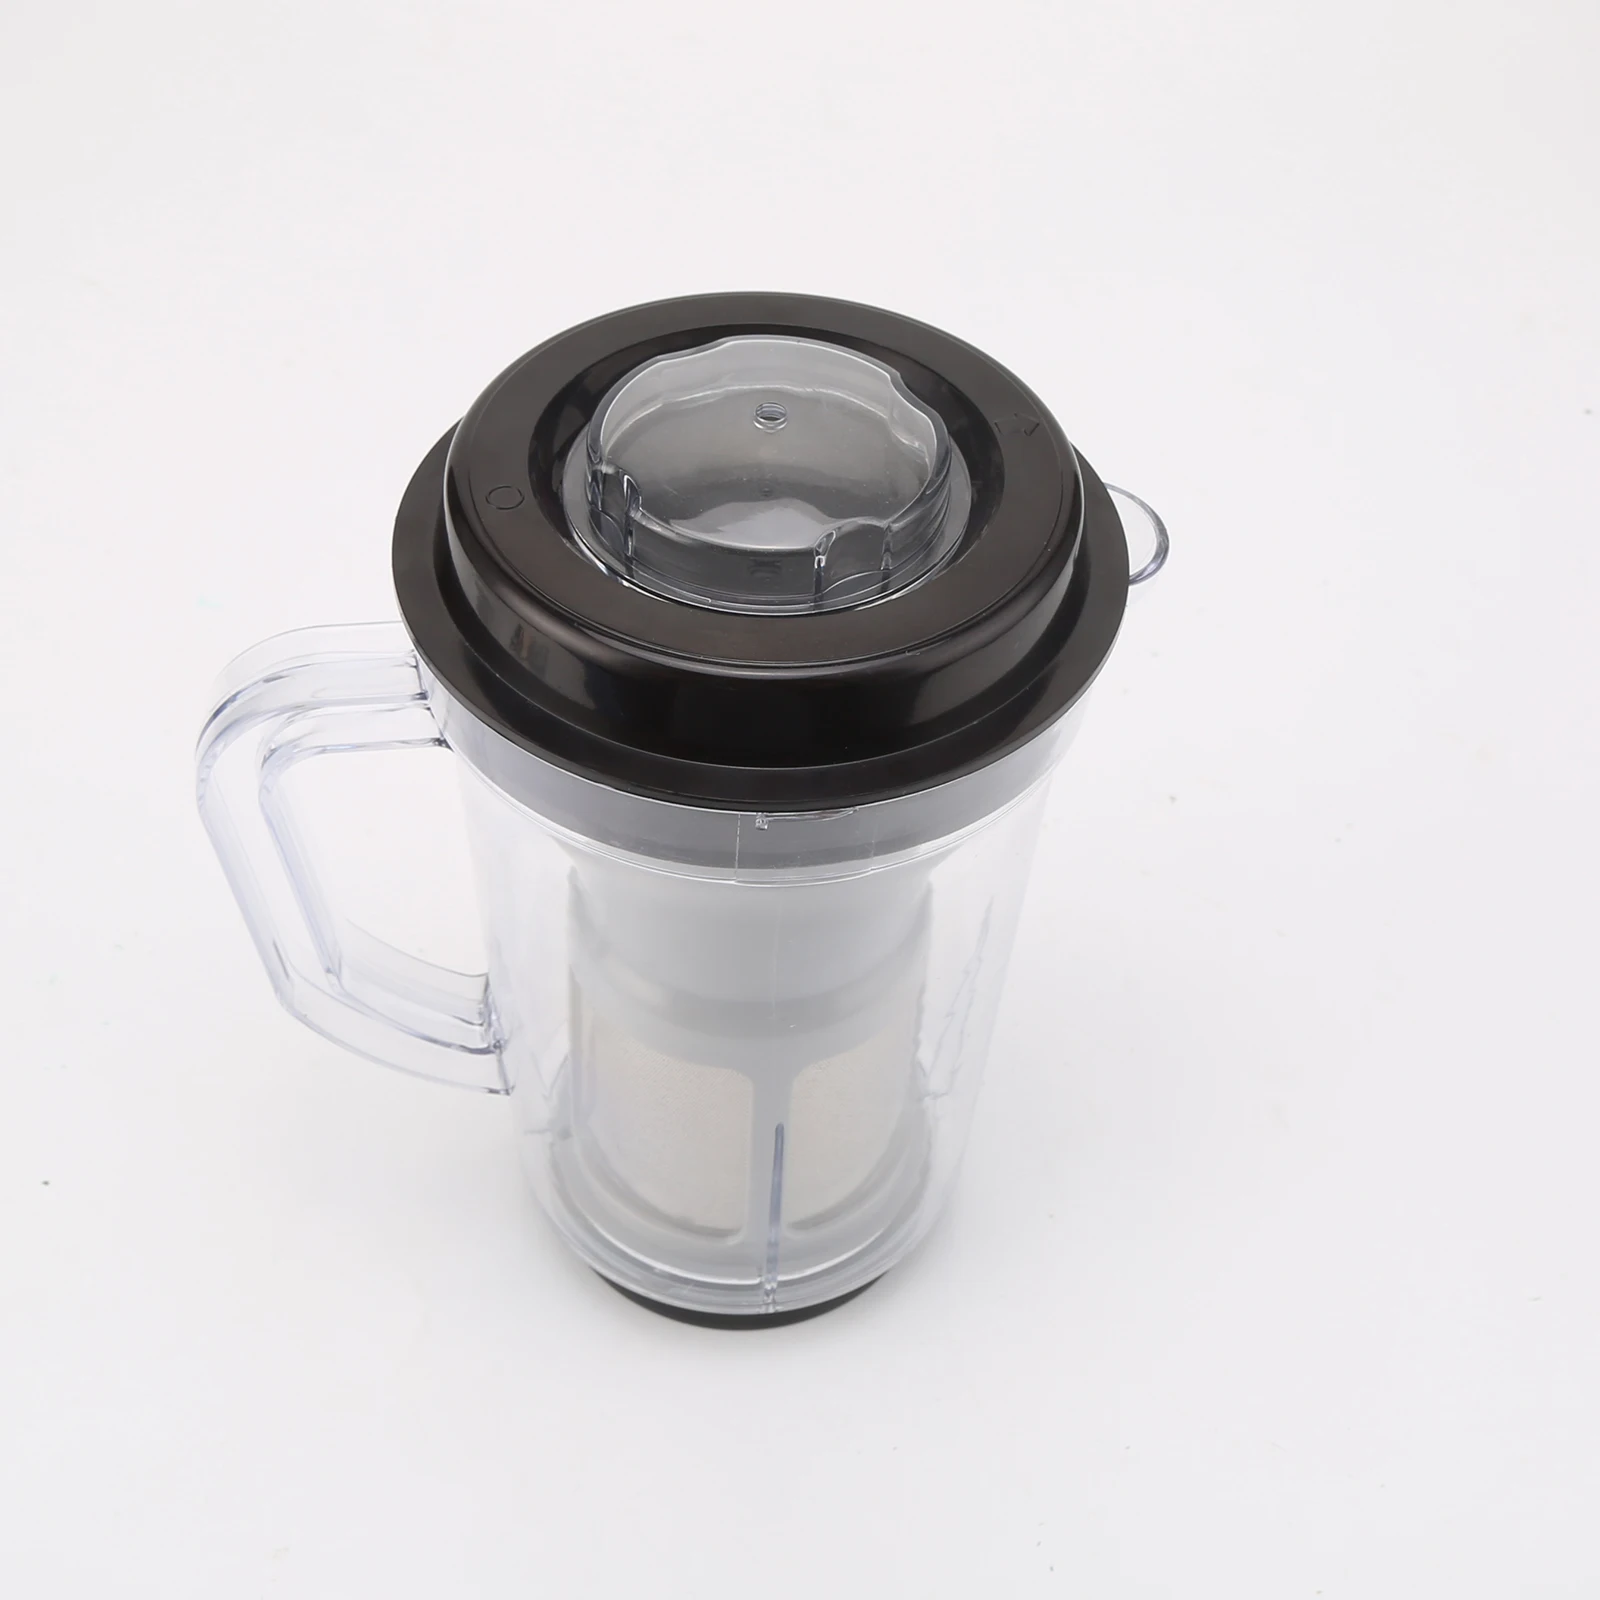 Blender Accessories Cup Filter Mixing Rod Compatible With Magic Bullet 250w  Mixer Blender Mixer Accessories Filter Cup - Coffee Filters - AliExpress